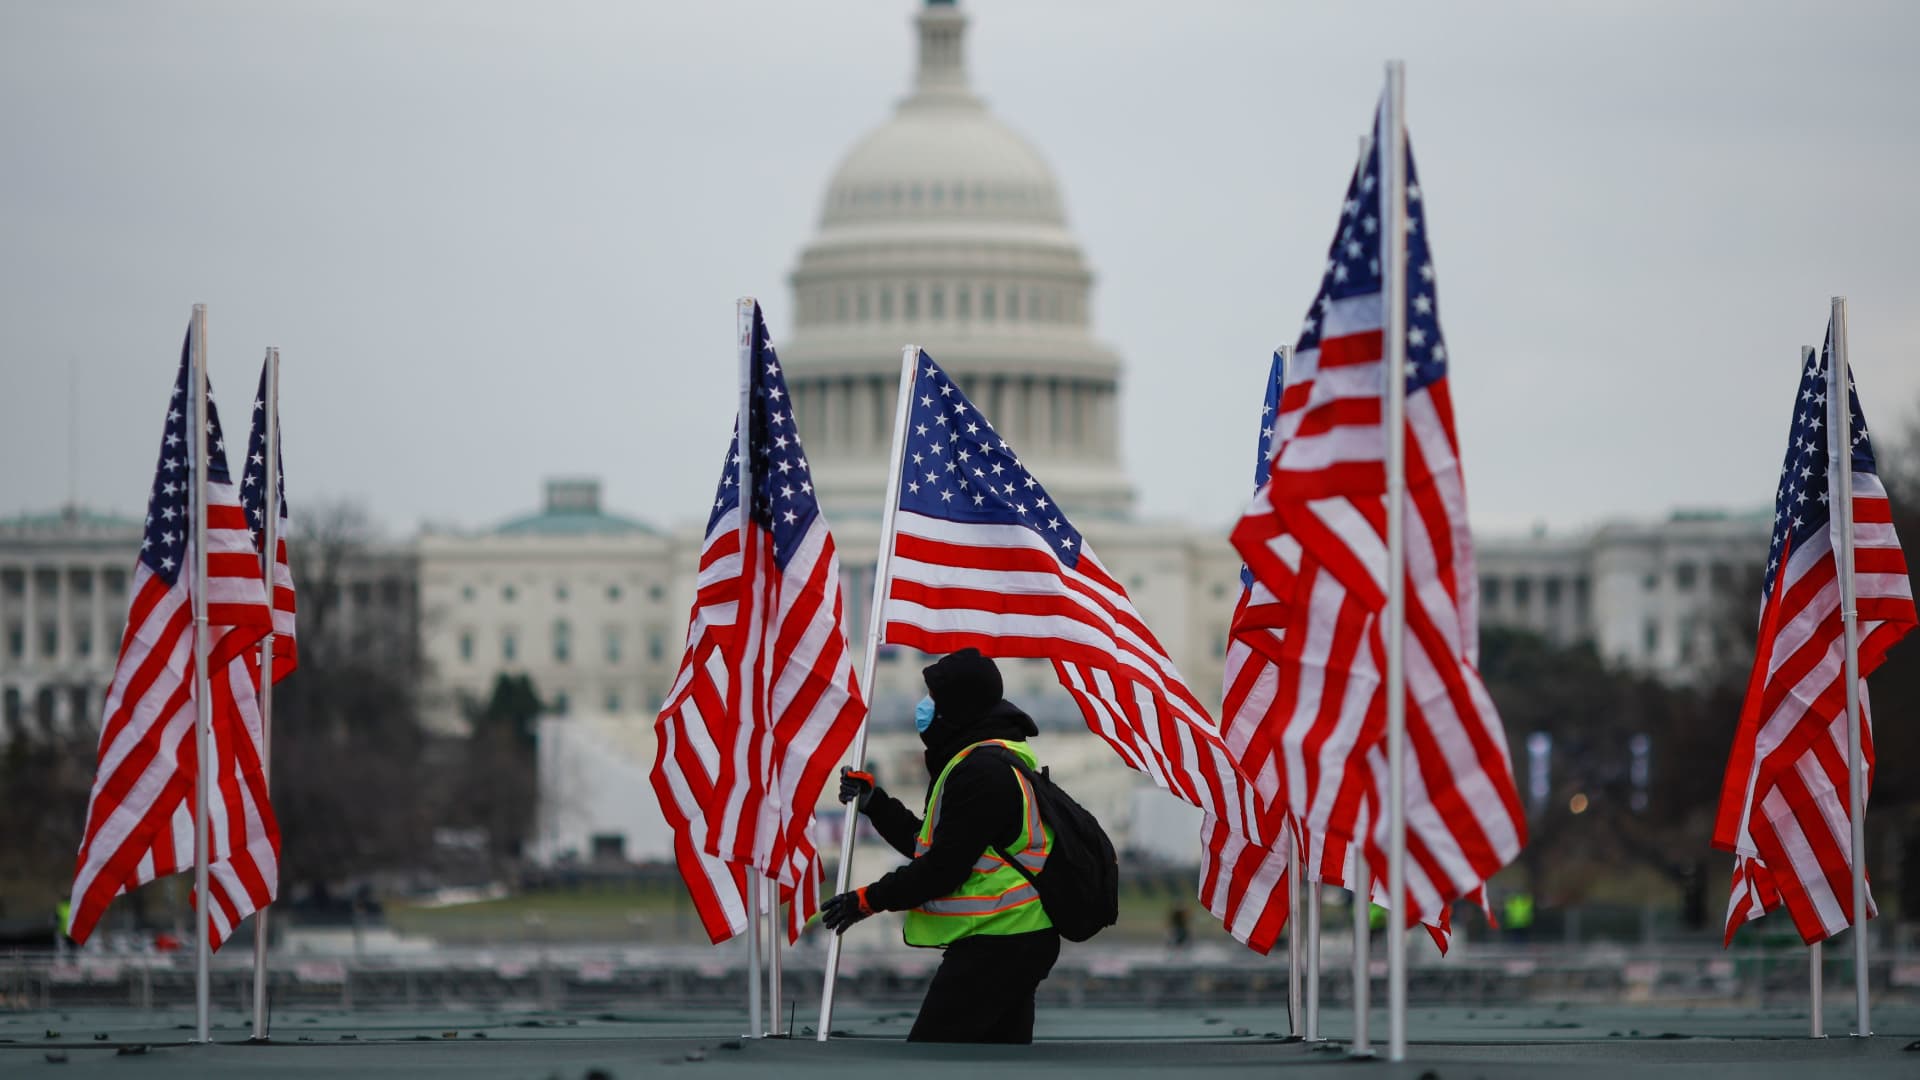 A worker installs U.S. flags as part of a Covid-19 memorial on the National Mall in Washington, D.C., on Jan.18, 2021.